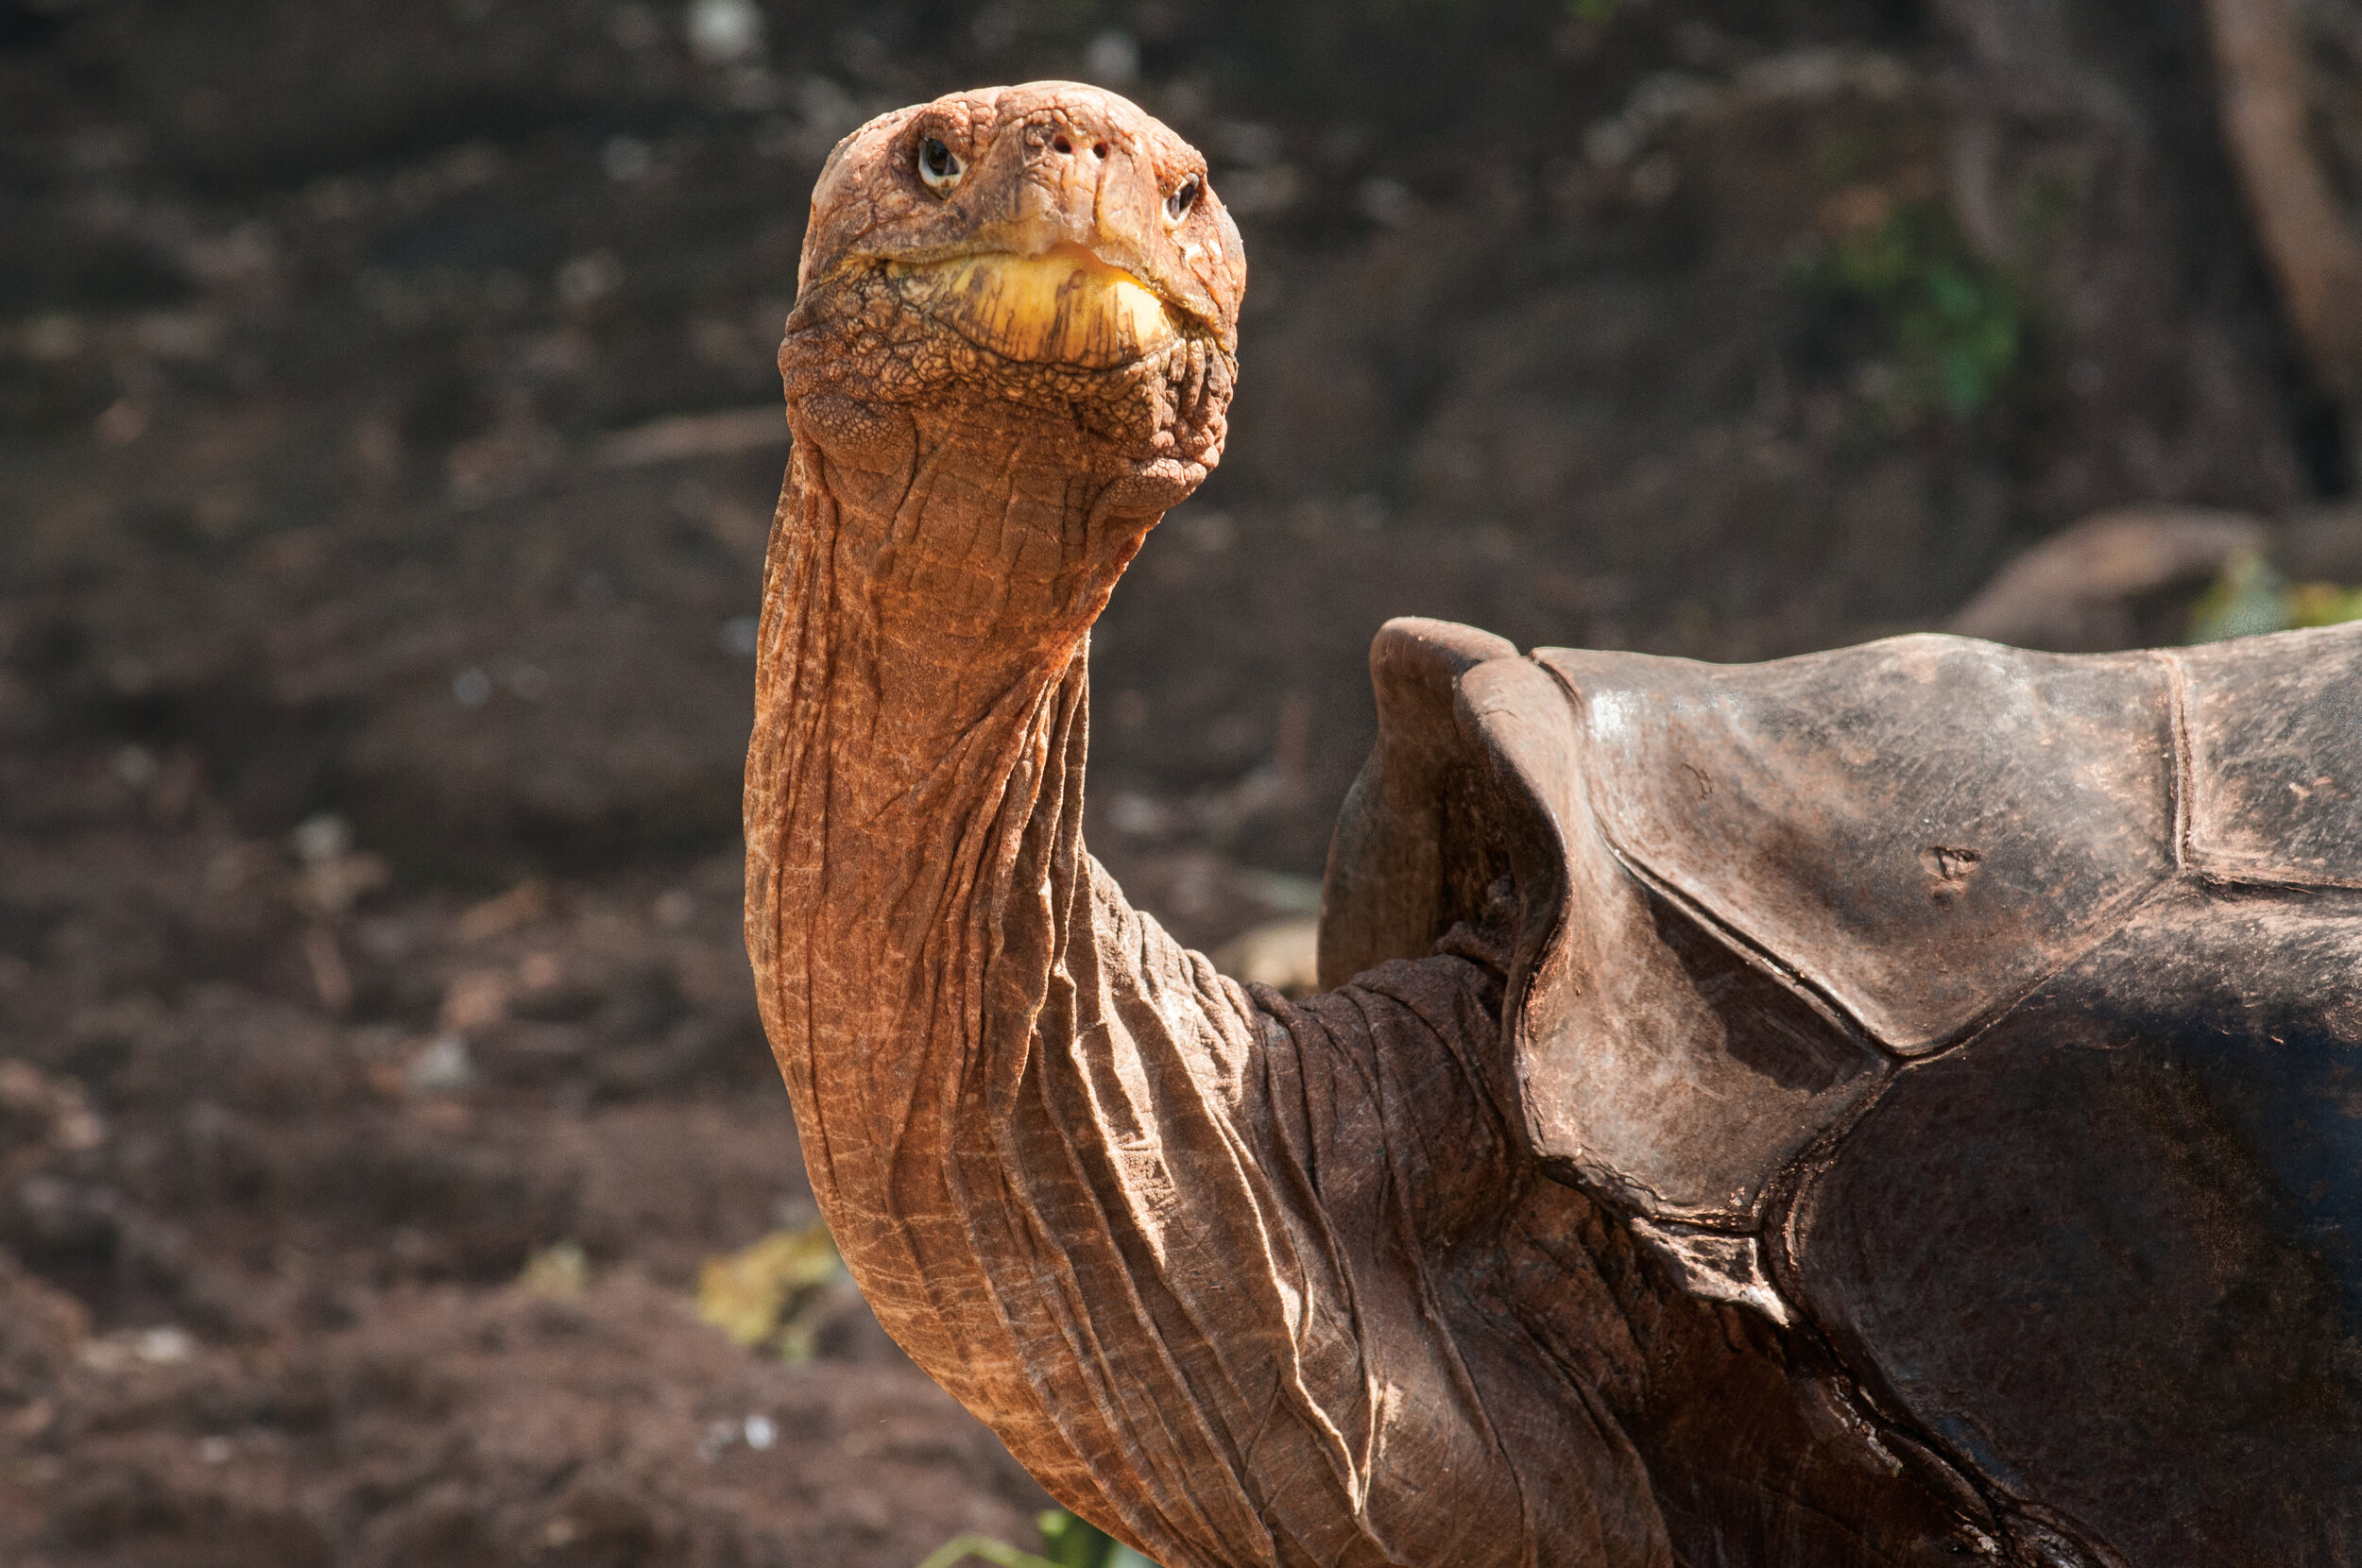   A giant tortoise called Super Diego, pictured at 91 years old, who lives at the Charles Darwin Research Station and was instrumental in re-populating his species, which was once on the brink of extinction (photo credit: Lindblad Expedtions)  